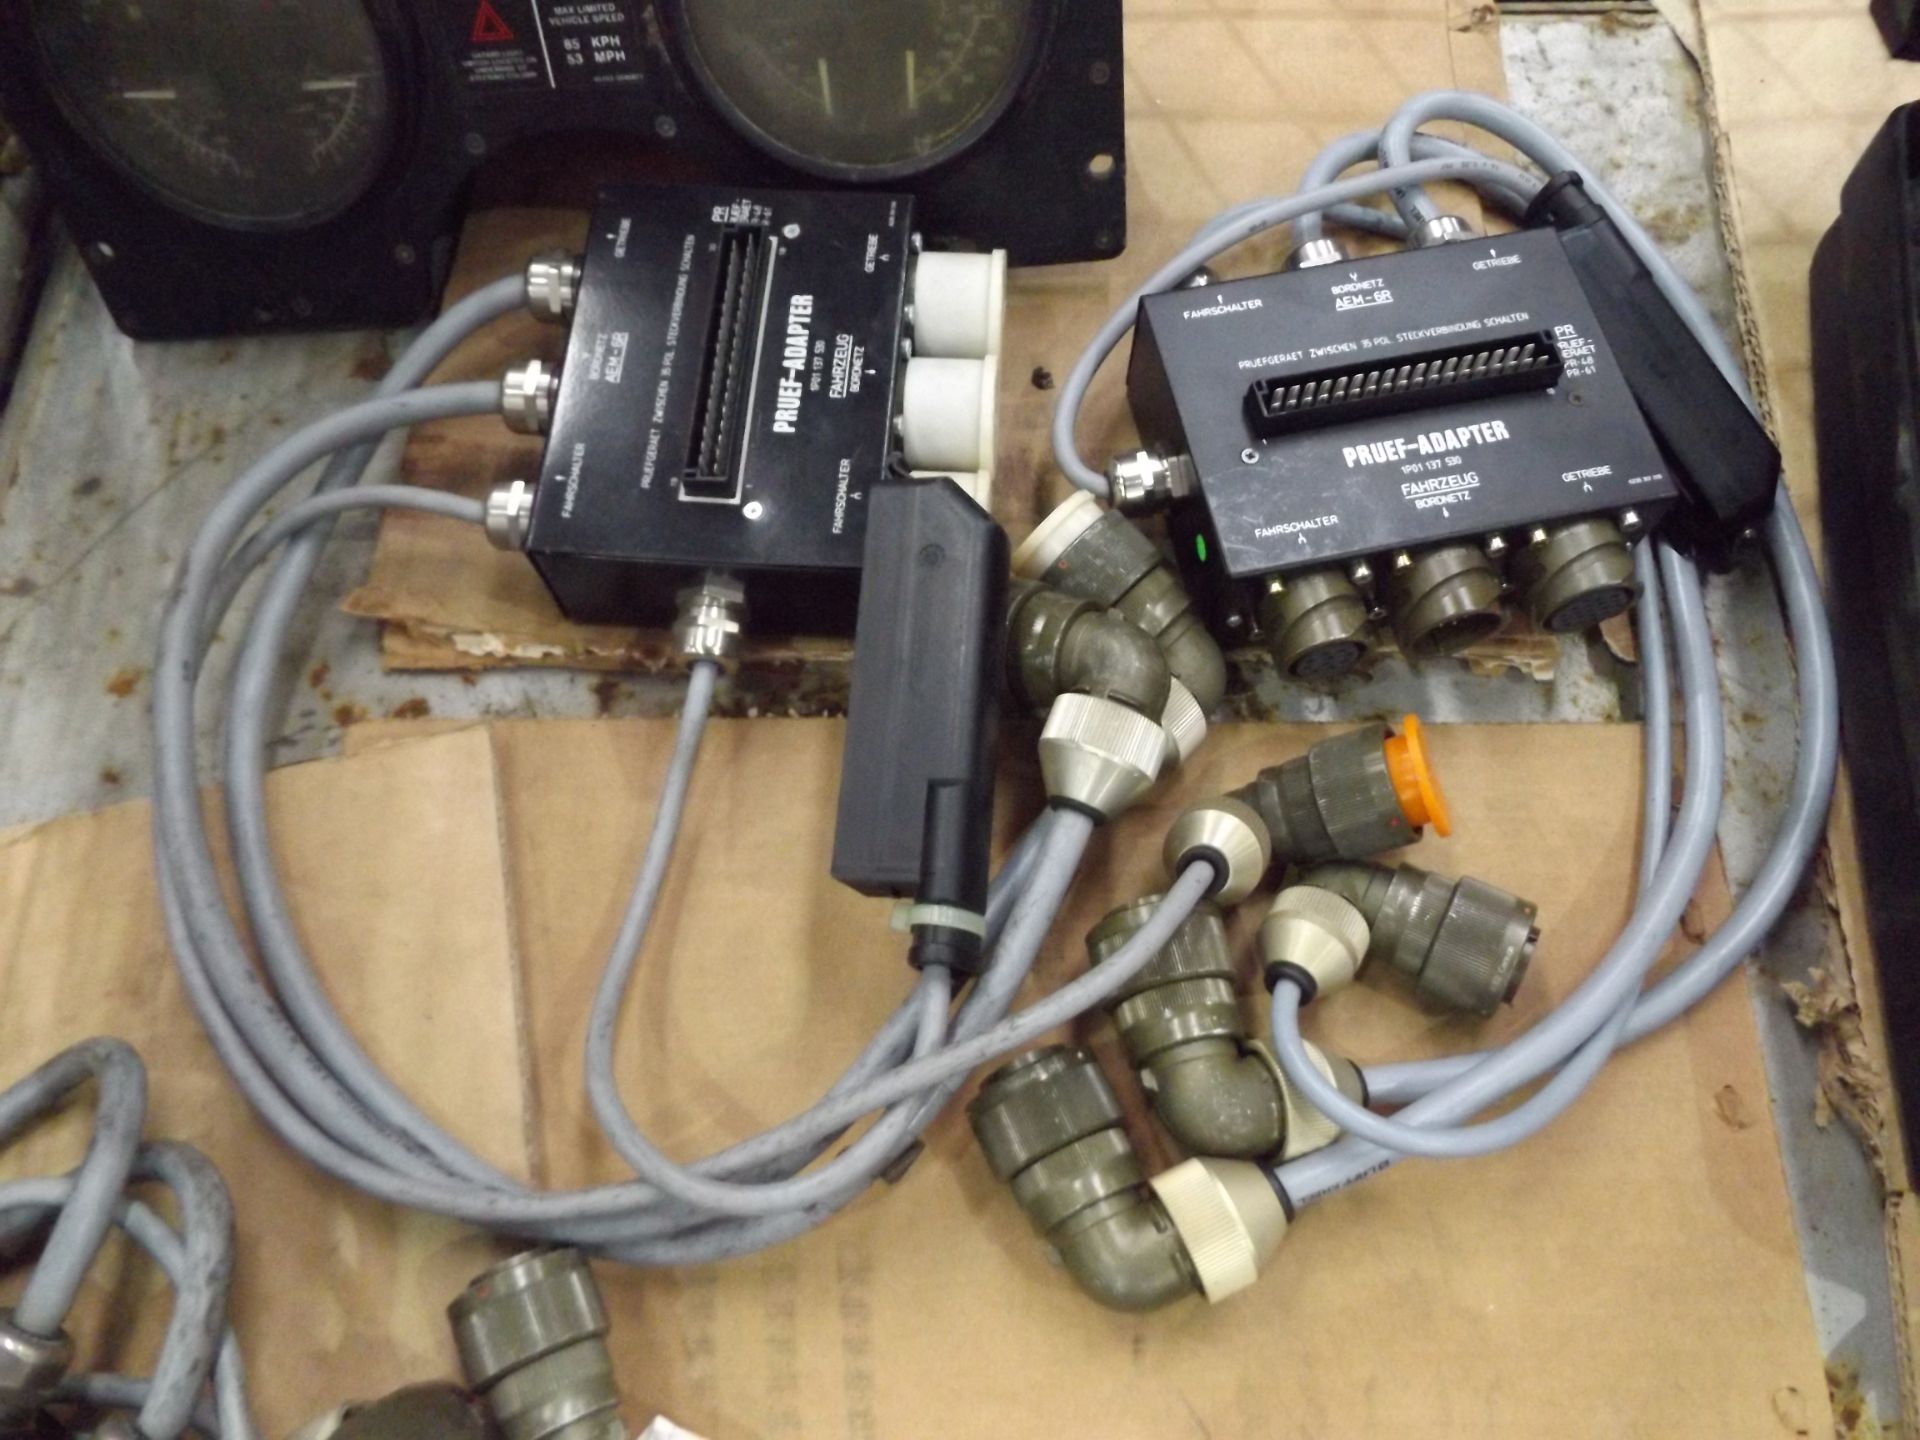 Mixed Stillage of Test Set, Test Adaptors and Instrument Panel - Image 5 of 10